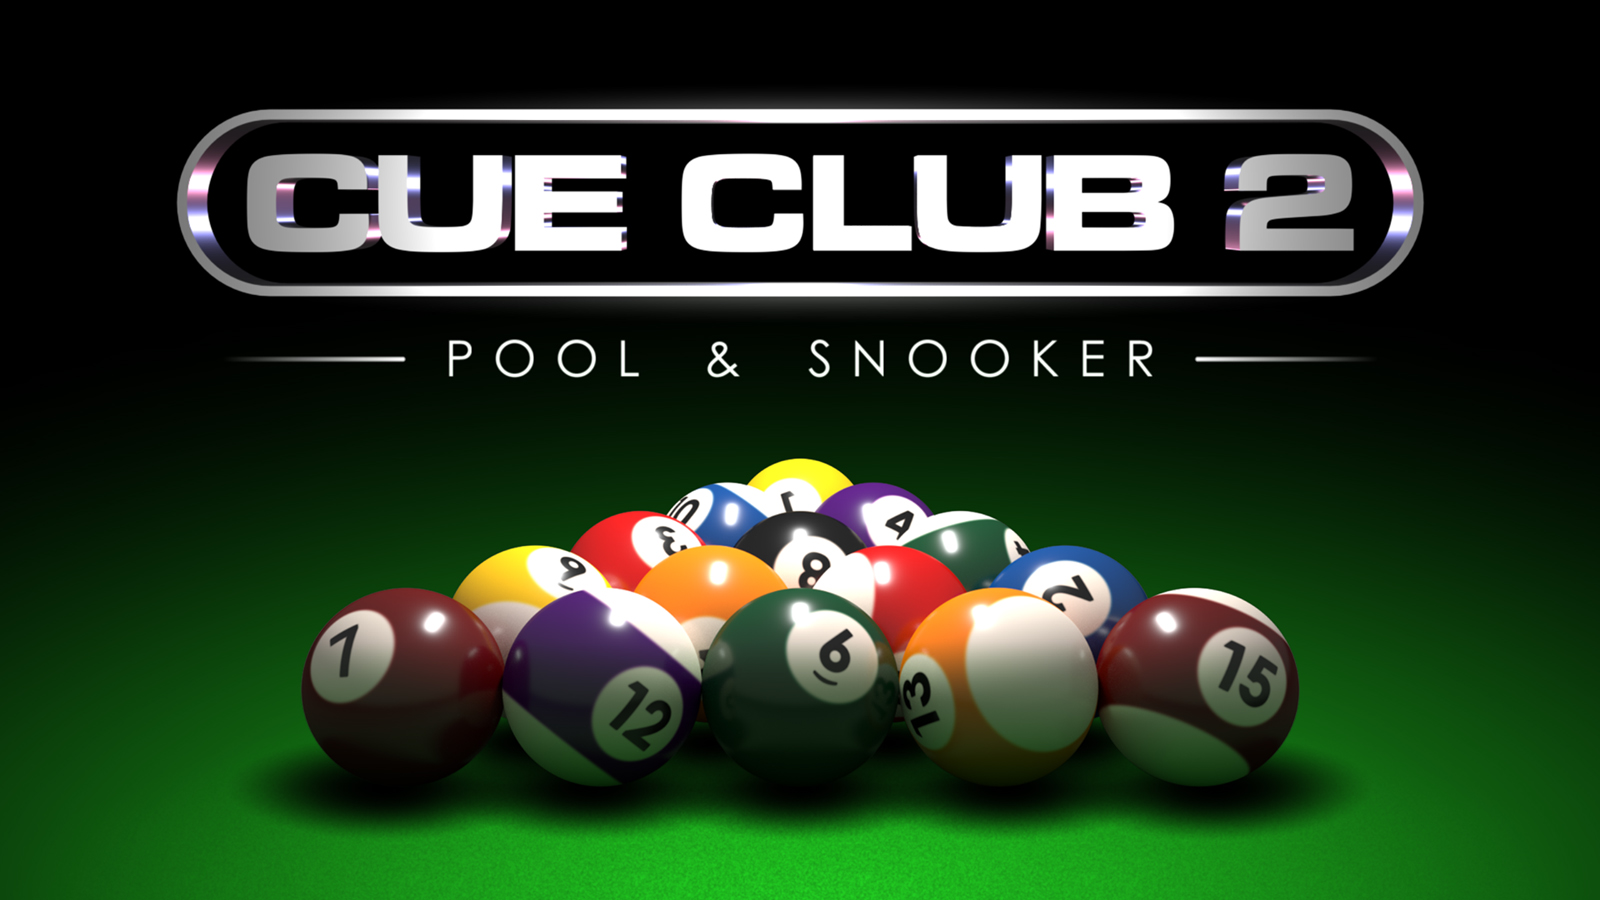 Cue club PS5 Version Full Game Free Download